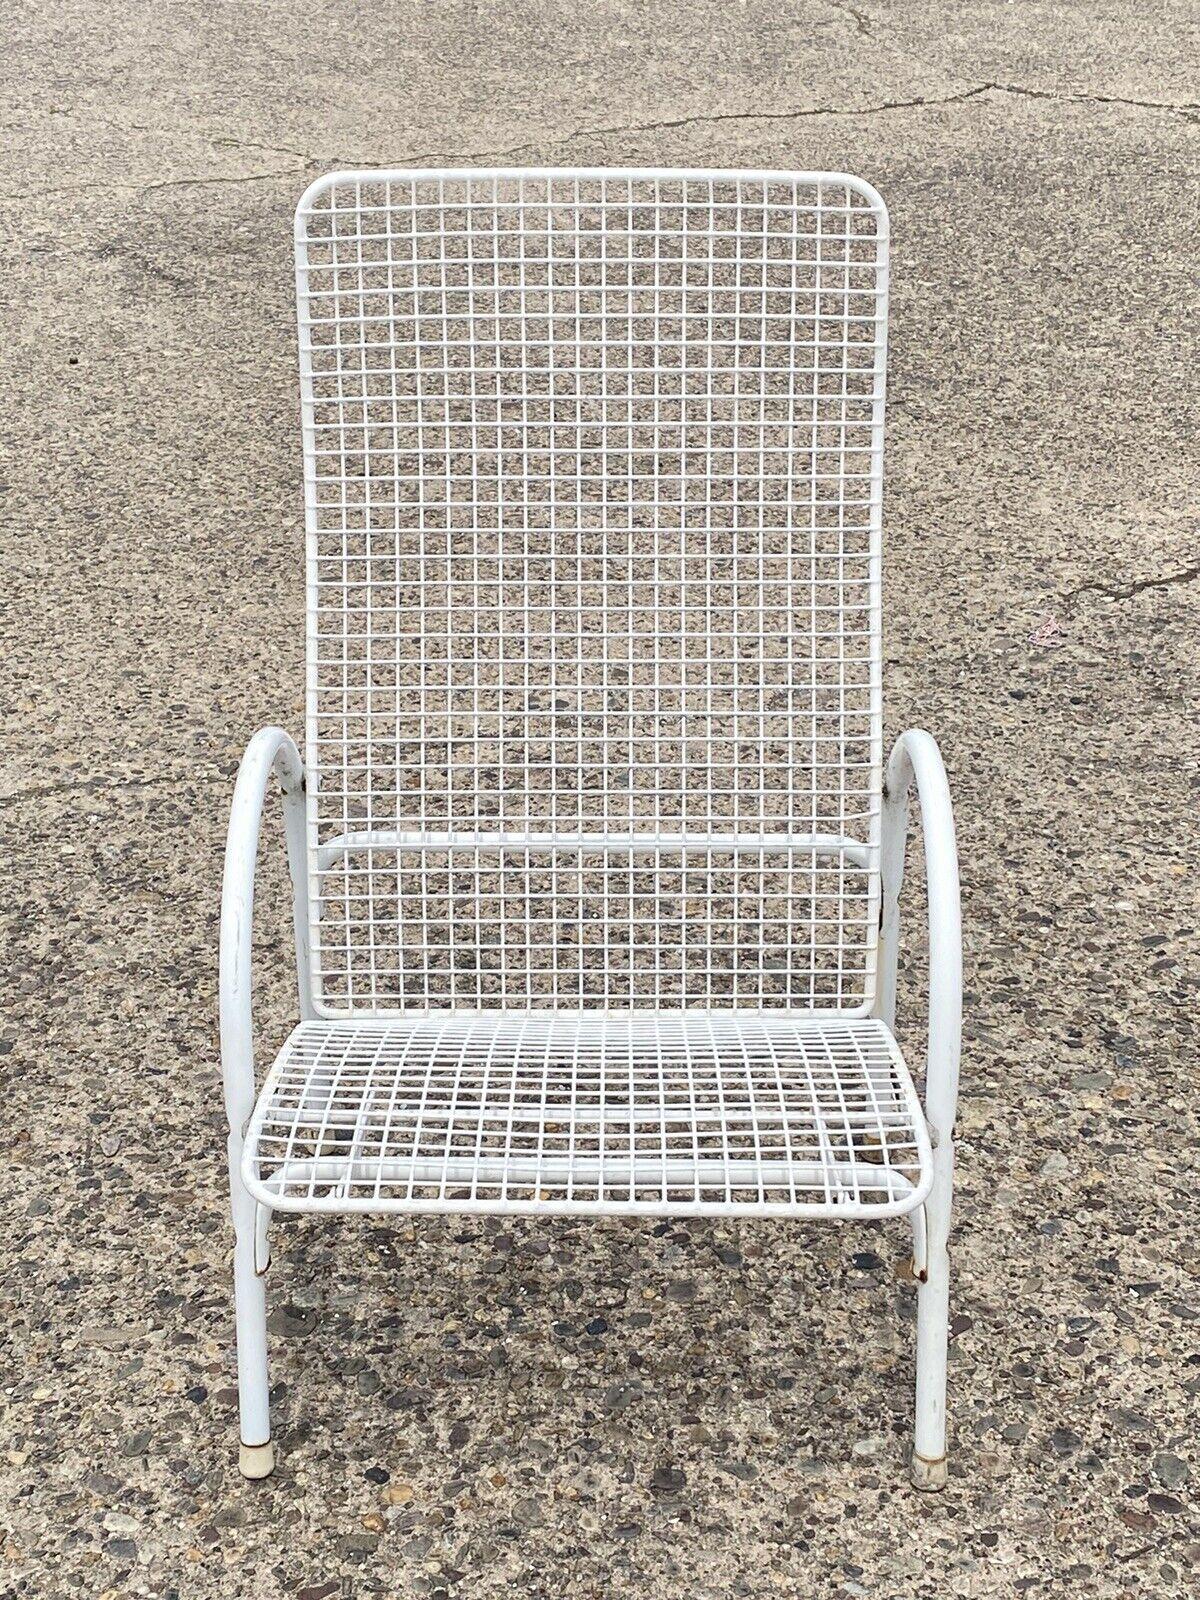 Vintage Reclining Wrought Iron Sculptural Mid Century Modern Patio Lounge Chair. Item features a steel and iron reclining frame with various settings, clean Modernist lines, sleek sculptural form. Circa Mid 20th Century. Measurements: 40